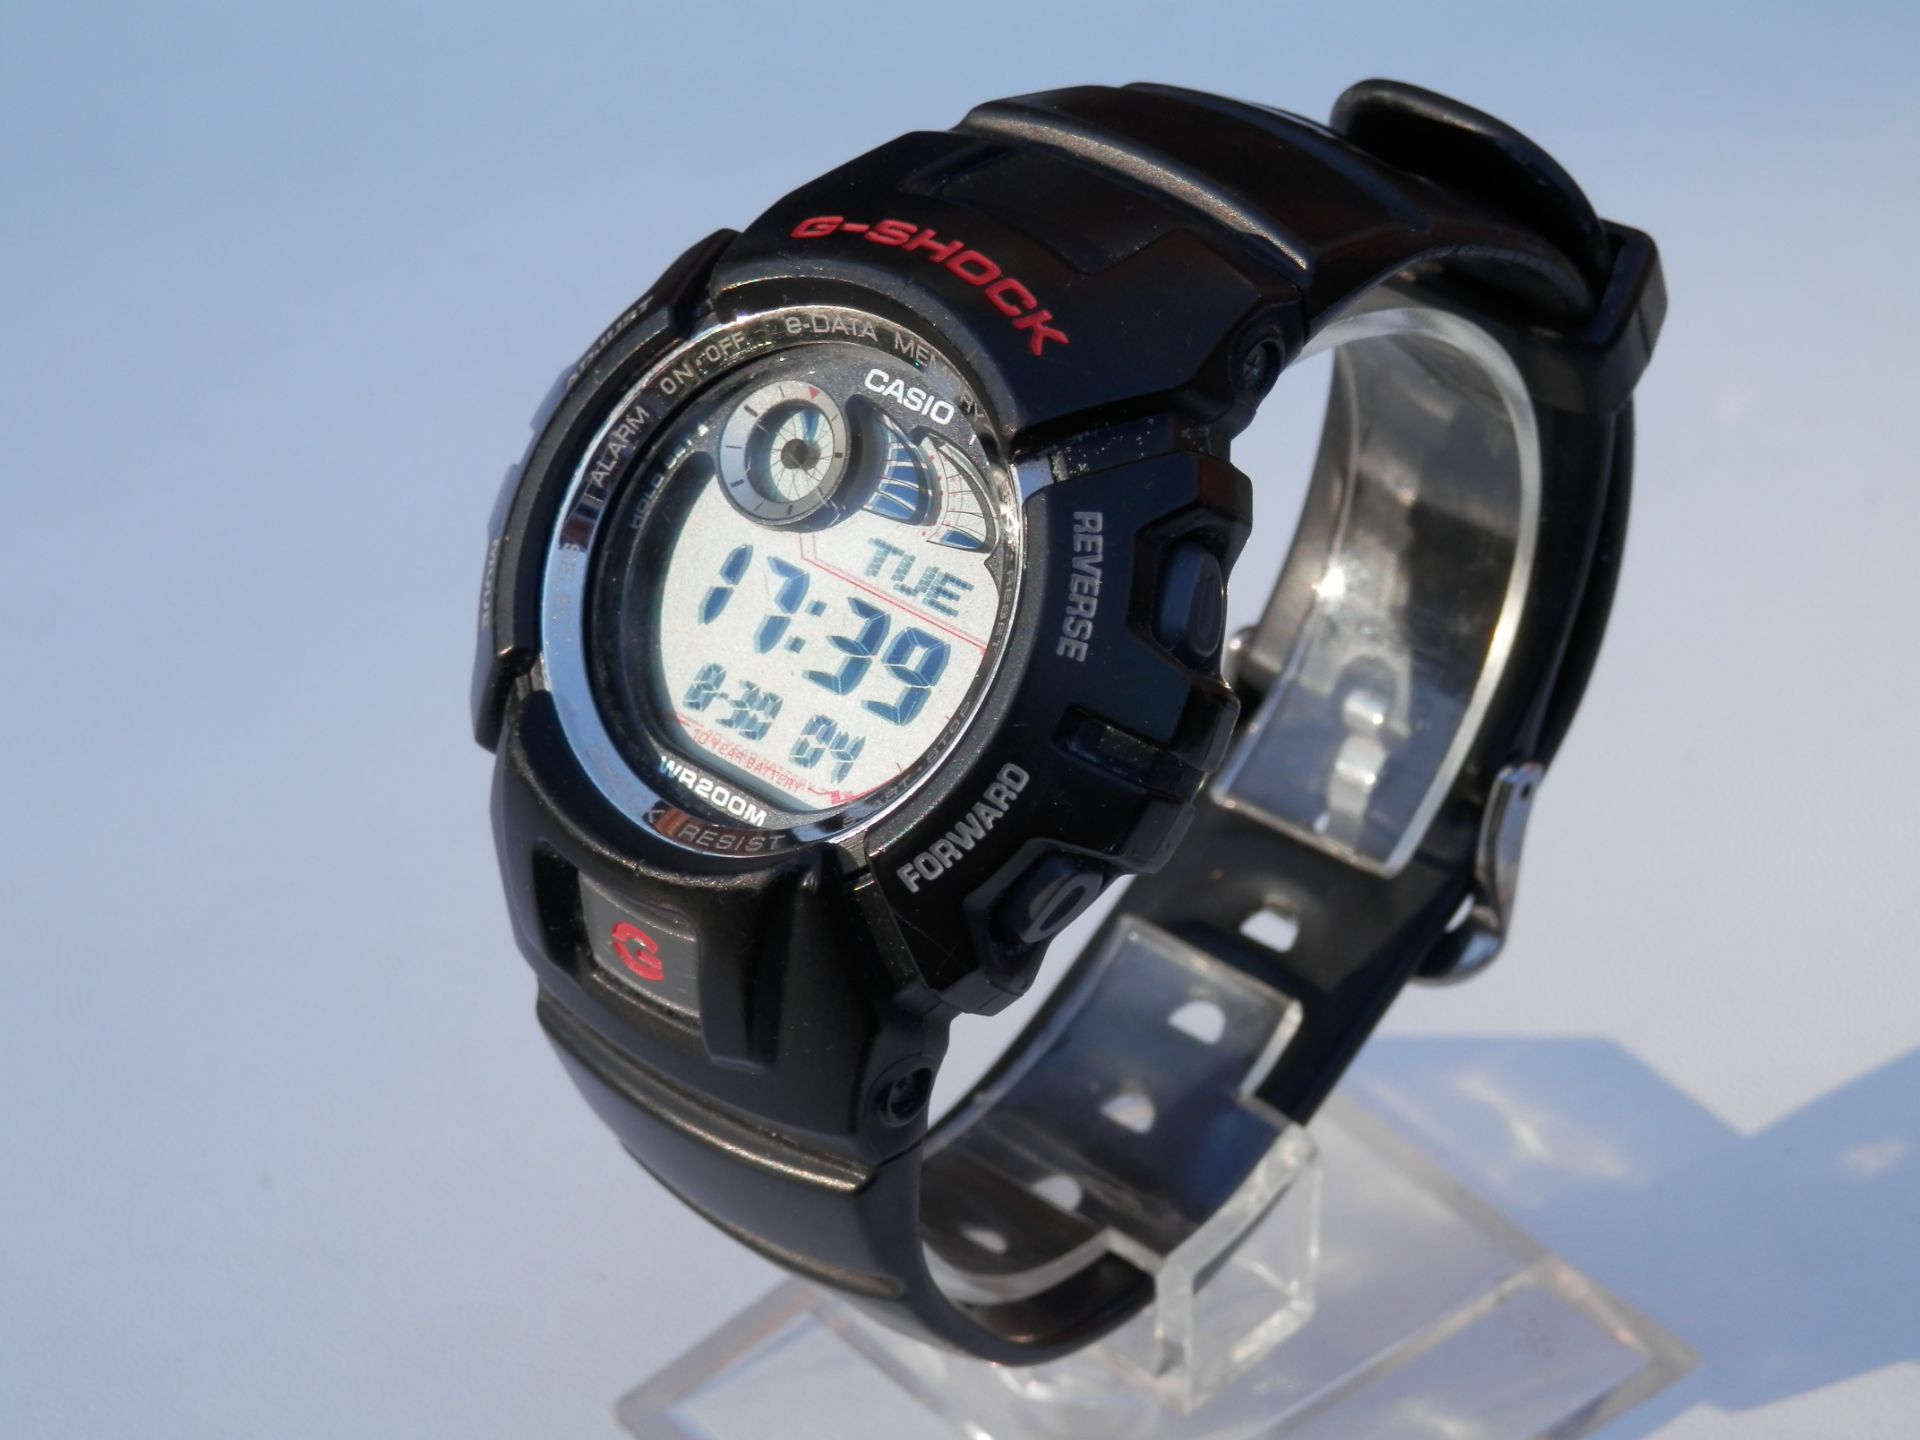 GENTS CASIO G-SHOCK 2900G 200 METRE DIGITAL SPORTS WATCH, ALL WORKING. GREAT WATCH RRP £89.99 - Image 5 of 9